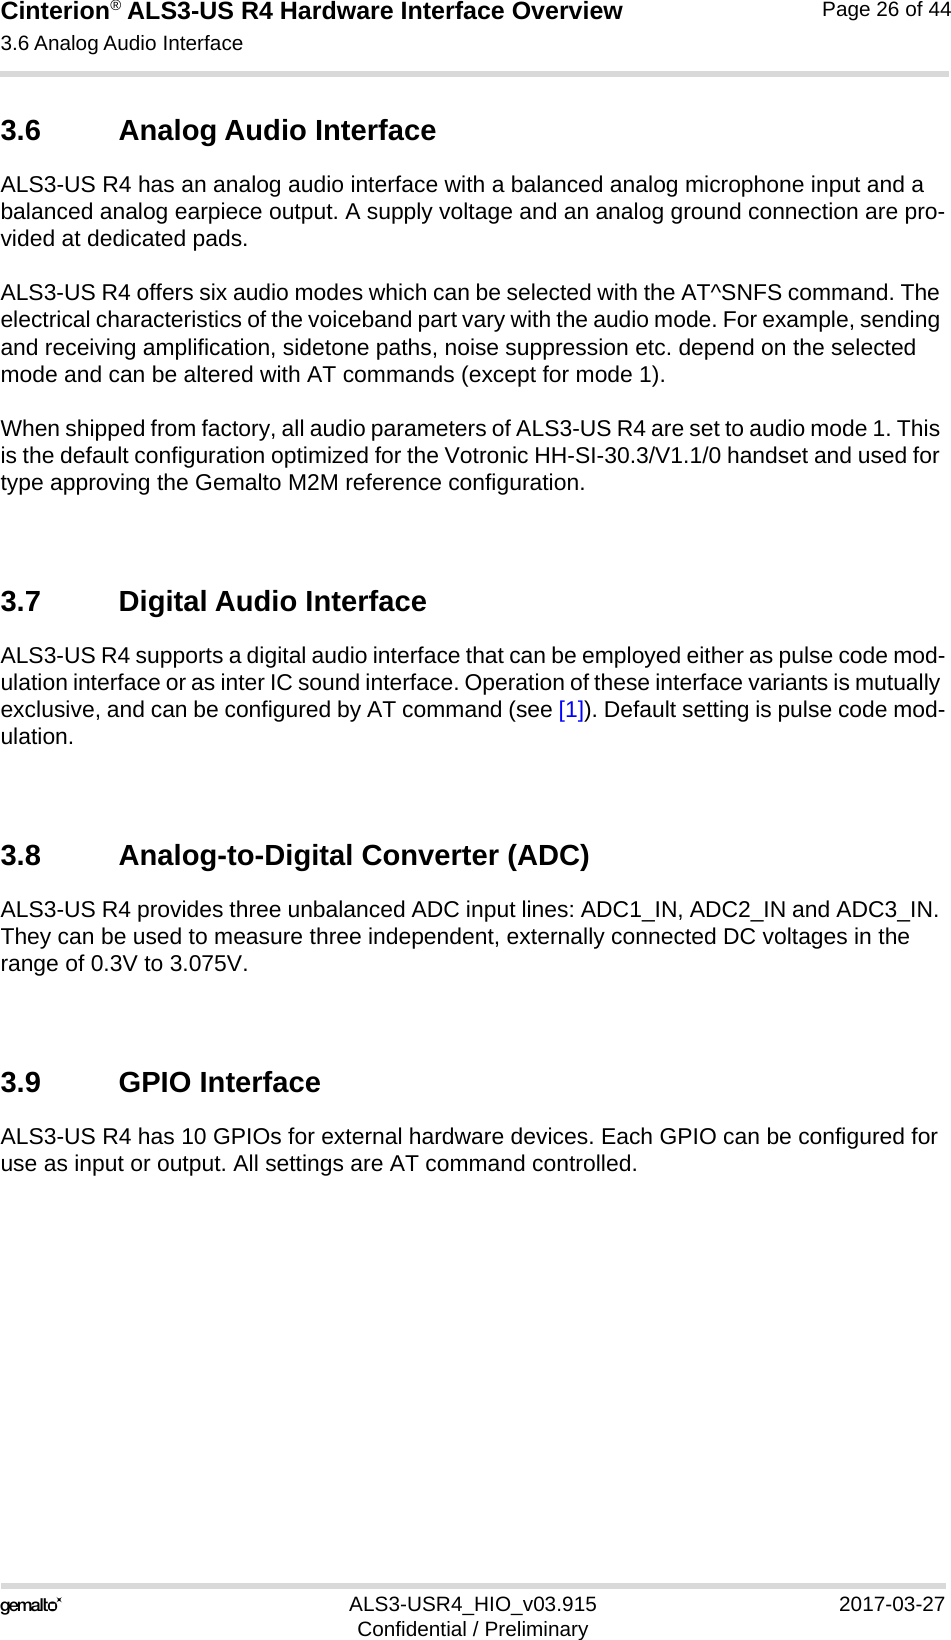 Cinterion® ALS3-US R4 Hardware Interface Overview3.6 Analog Audio Interface27ALS3-USR4_HIO_v03.915 2017-03-27Confidential / PreliminaryPage 26 of 443.6 Analog Audio InterfaceALS3-US R4 has an analog audio interface with a balanced analog microphone input and a balanced analog earpiece output. A supply voltage and an analog ground connection are pro-vided at dedicated pads.ALS3-US R4 offers six audio modes which can be selected with the AT^SNFS command. The electrical characteristics of the voiceband part vary with the audio mode. For example, sending and receiving amplification, sidetone paths, noise suppression etc. depend on the selected mode and can be altered with AT commands (except for mode 1).When shipped from factory, all audio parameters of ALS3-US R4 are set to audio mode 1. This is the default configuration optimized for the Votronic HH-SI-30.3/V1.1/0 handset and used for type approving the Gemalto M2M reference configuration. 3.7 Digital Audio InterfaceALS3-US R4 supports a digital audio interface that can be employed either as pulse code mod-ulation interface or as inter IC sound interface. Operation of these interface variants is mutually exclusive, and can be configured by AT command (see [1]). Default setting is pulse code mod-ulation.3.8 Analog-to-Digital Converter (ADC)ALS3-US R4 provides three unbalanced ADC input lines: ADC1_IN, ADC2_IN and ADC3_IN. They can be used to measure three independent, externally connected DC voltages in the range of 0.3V to 3.075V.3.9 GPIO InterfaceALS3-US R4 has 10 GPIOs for external hardware devices. Each GPIO can be configured for use as input or output. All settings are AT command controlled. 